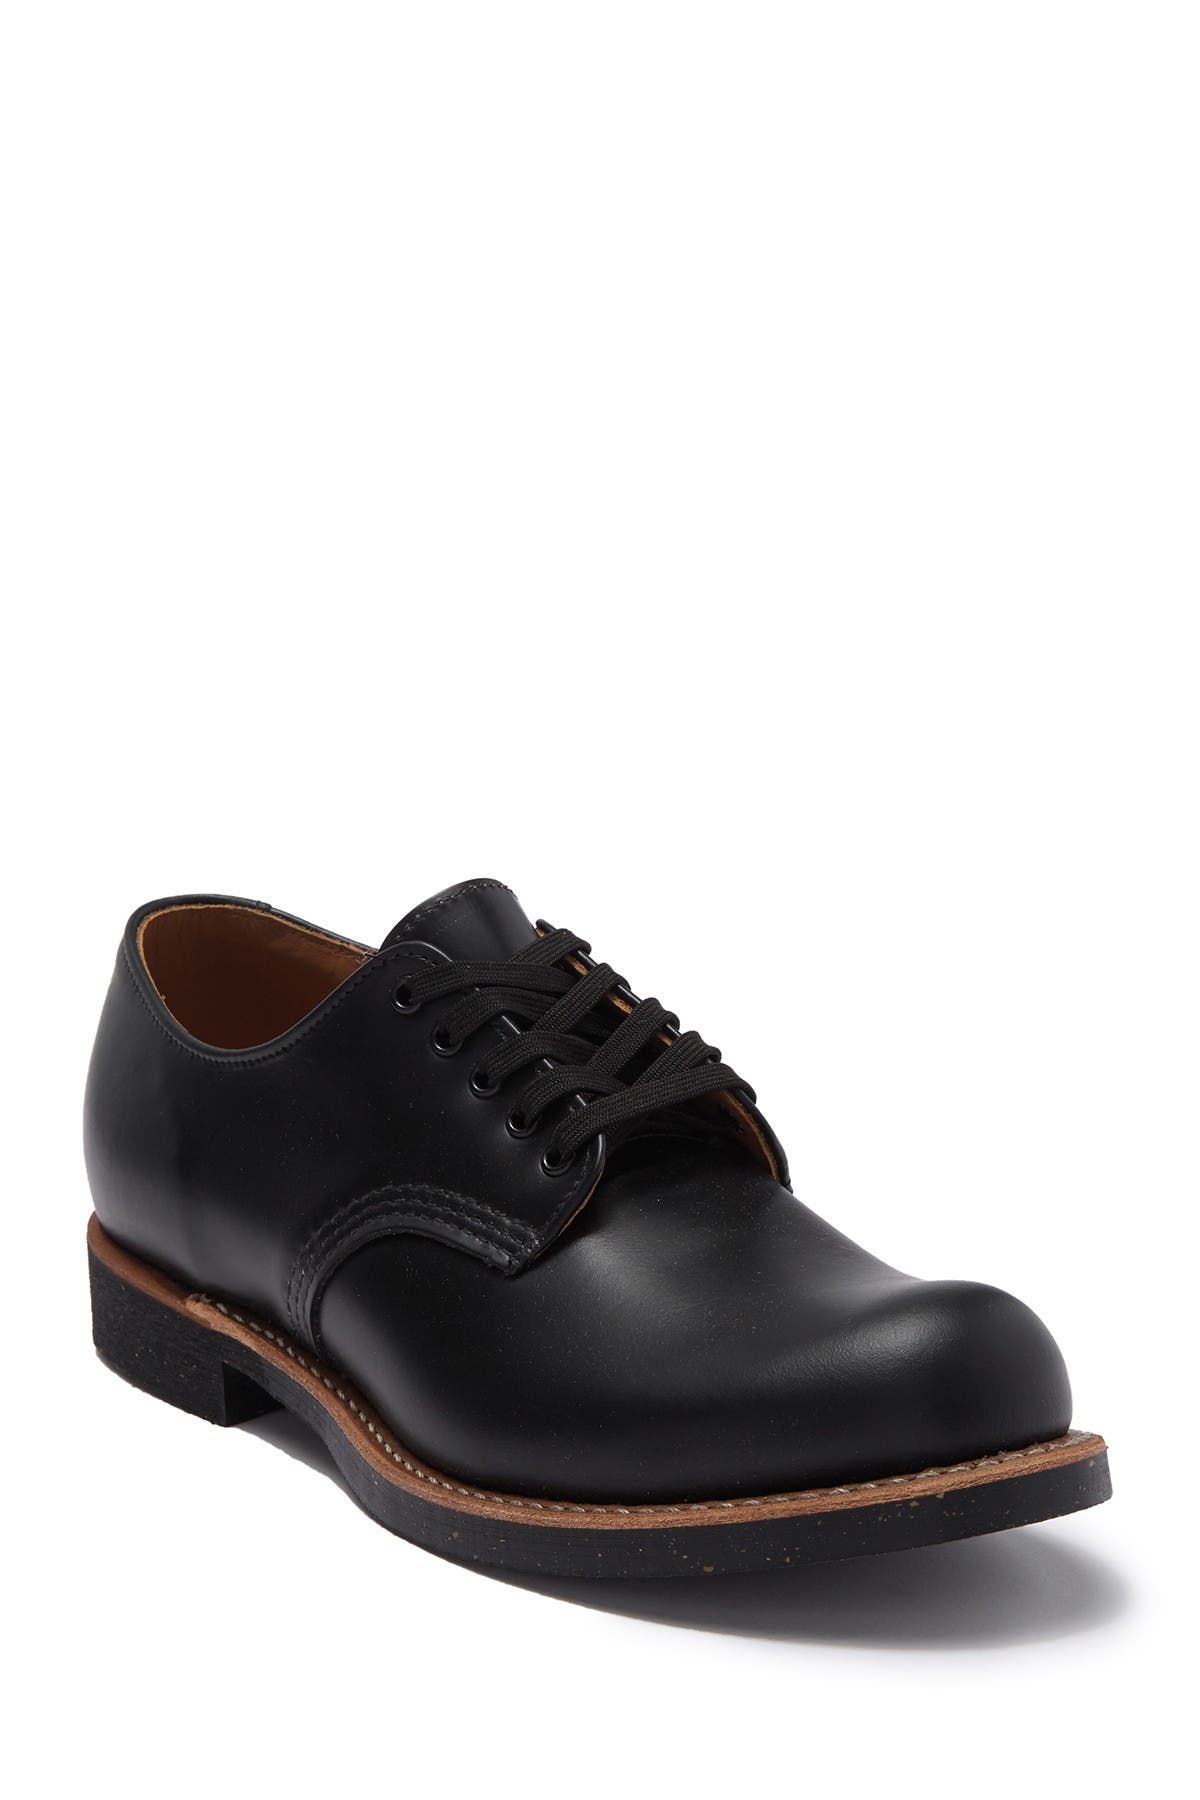 red wing foreman oxford